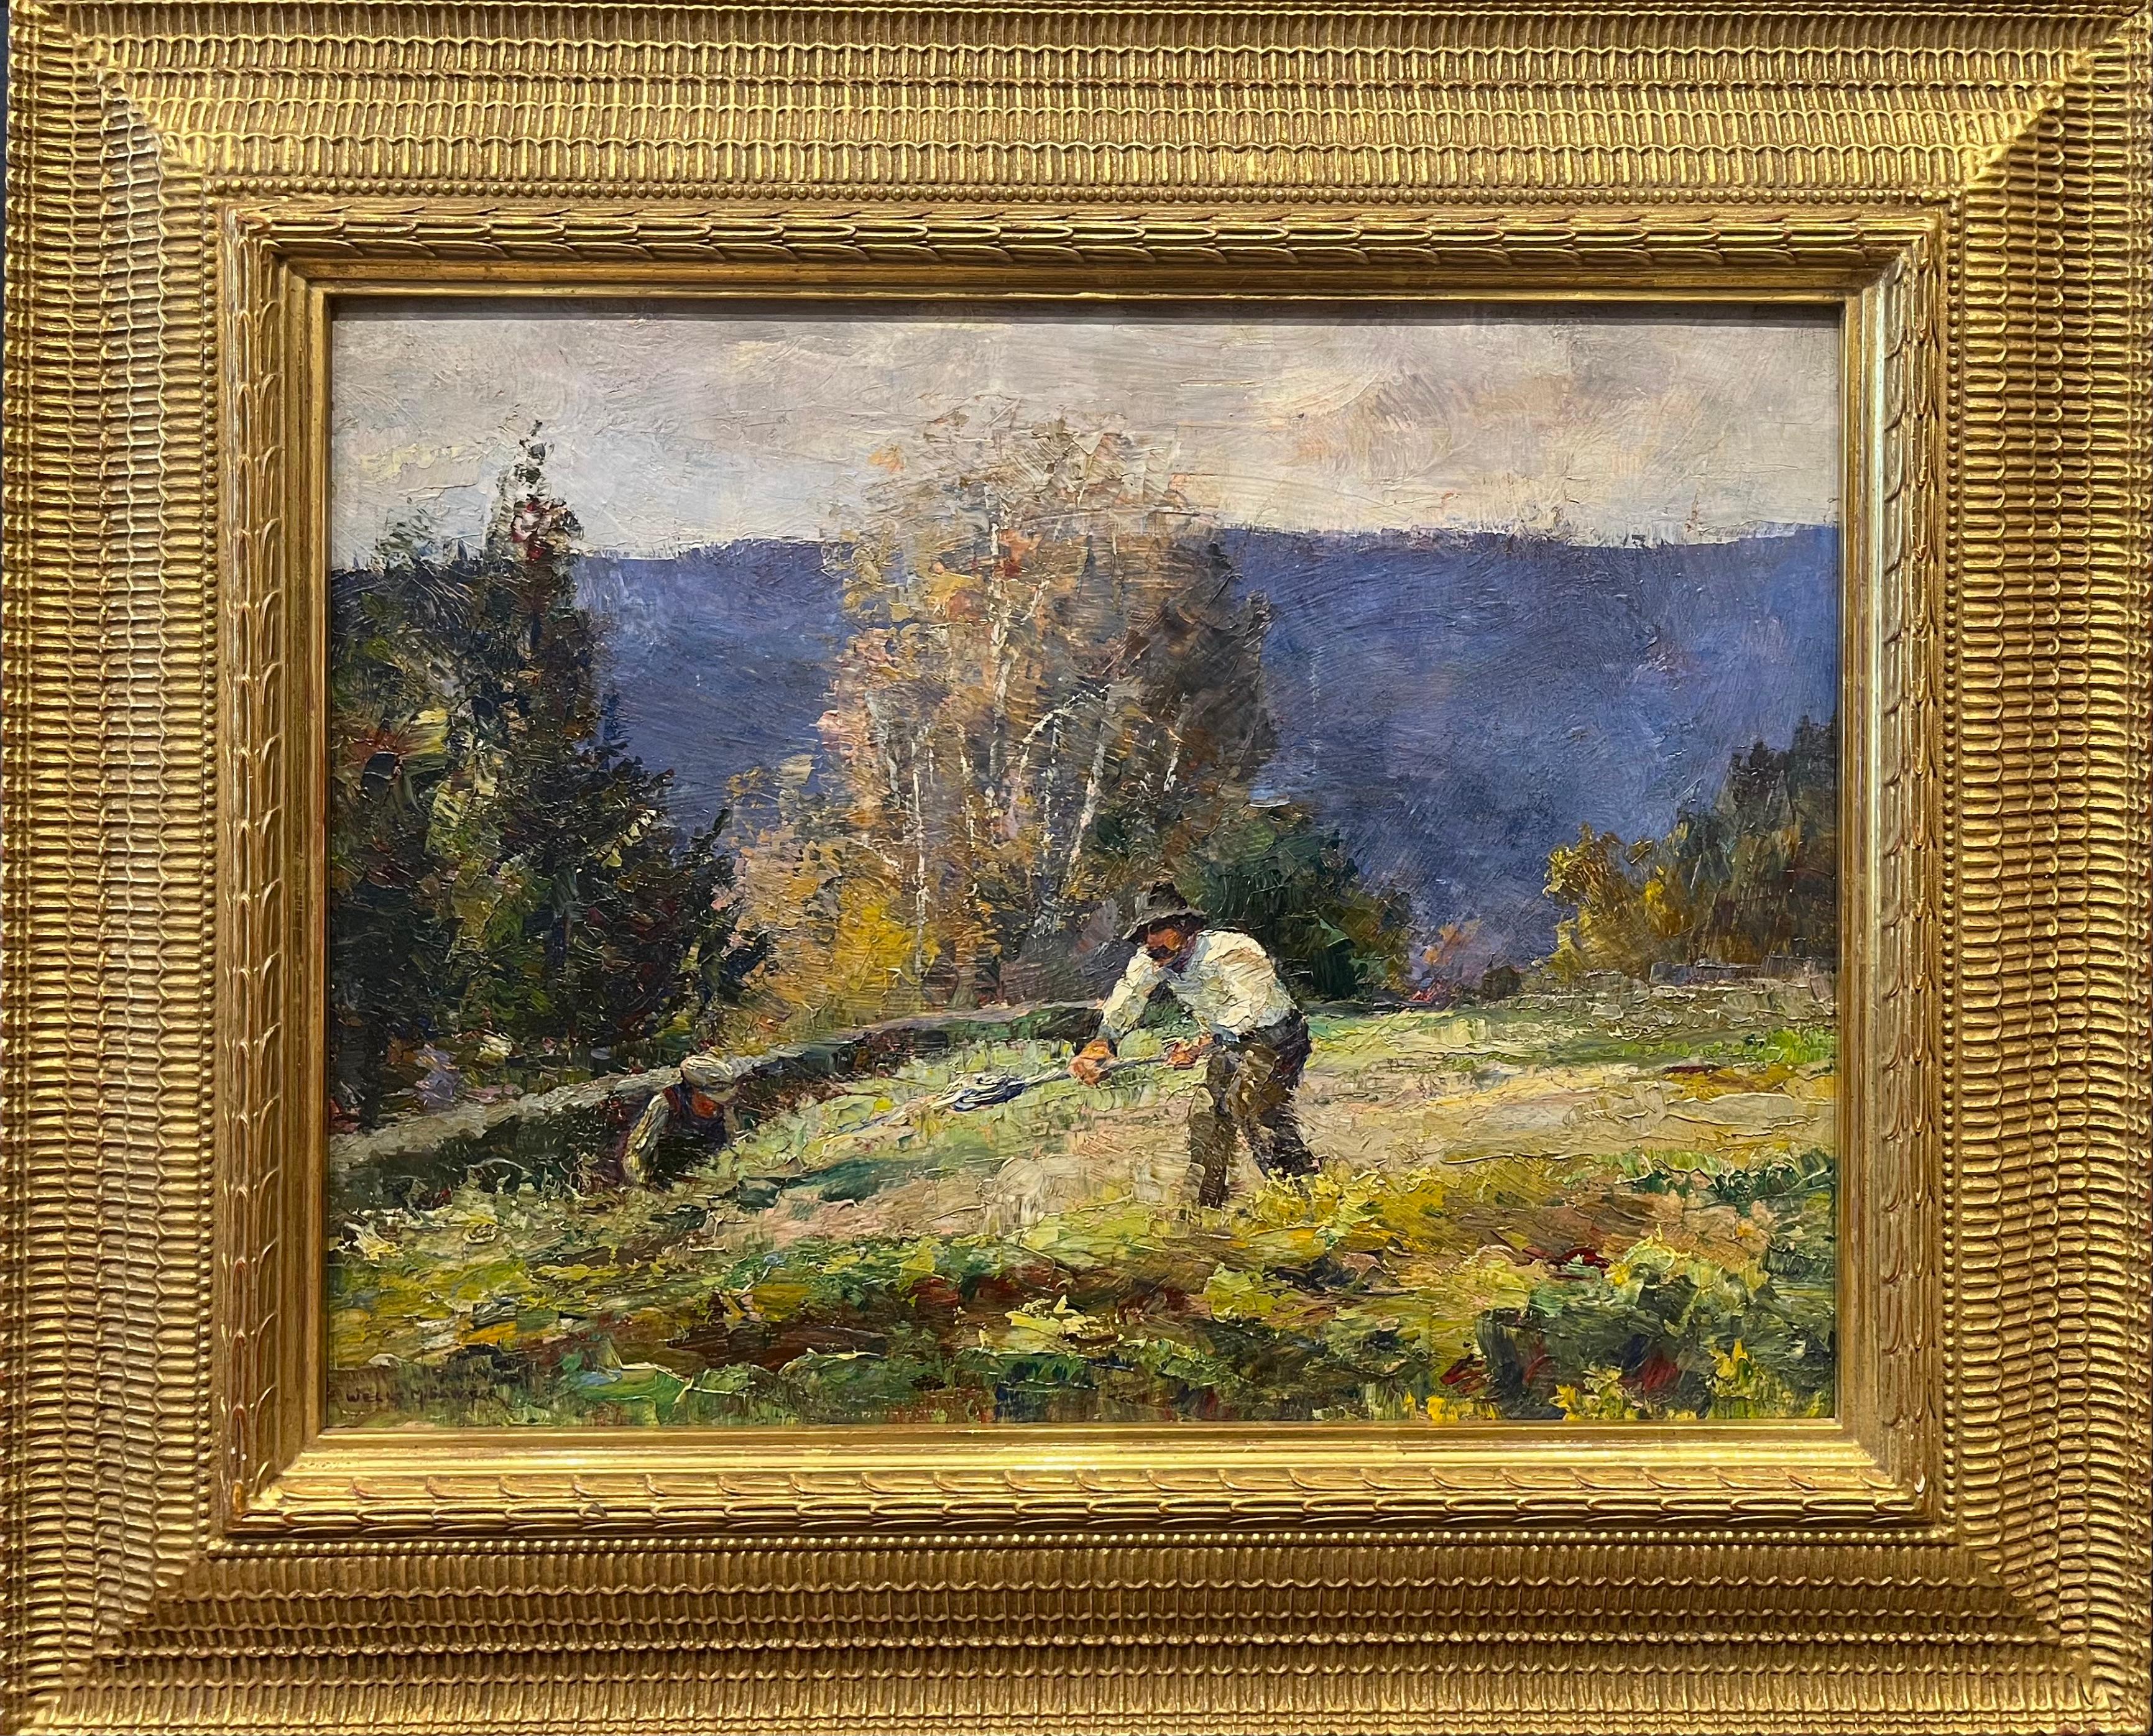 Wells Moses Sawyer Figurative Painting - Oil Landscape of Man Plowing Field Titled The Garden in Autumn